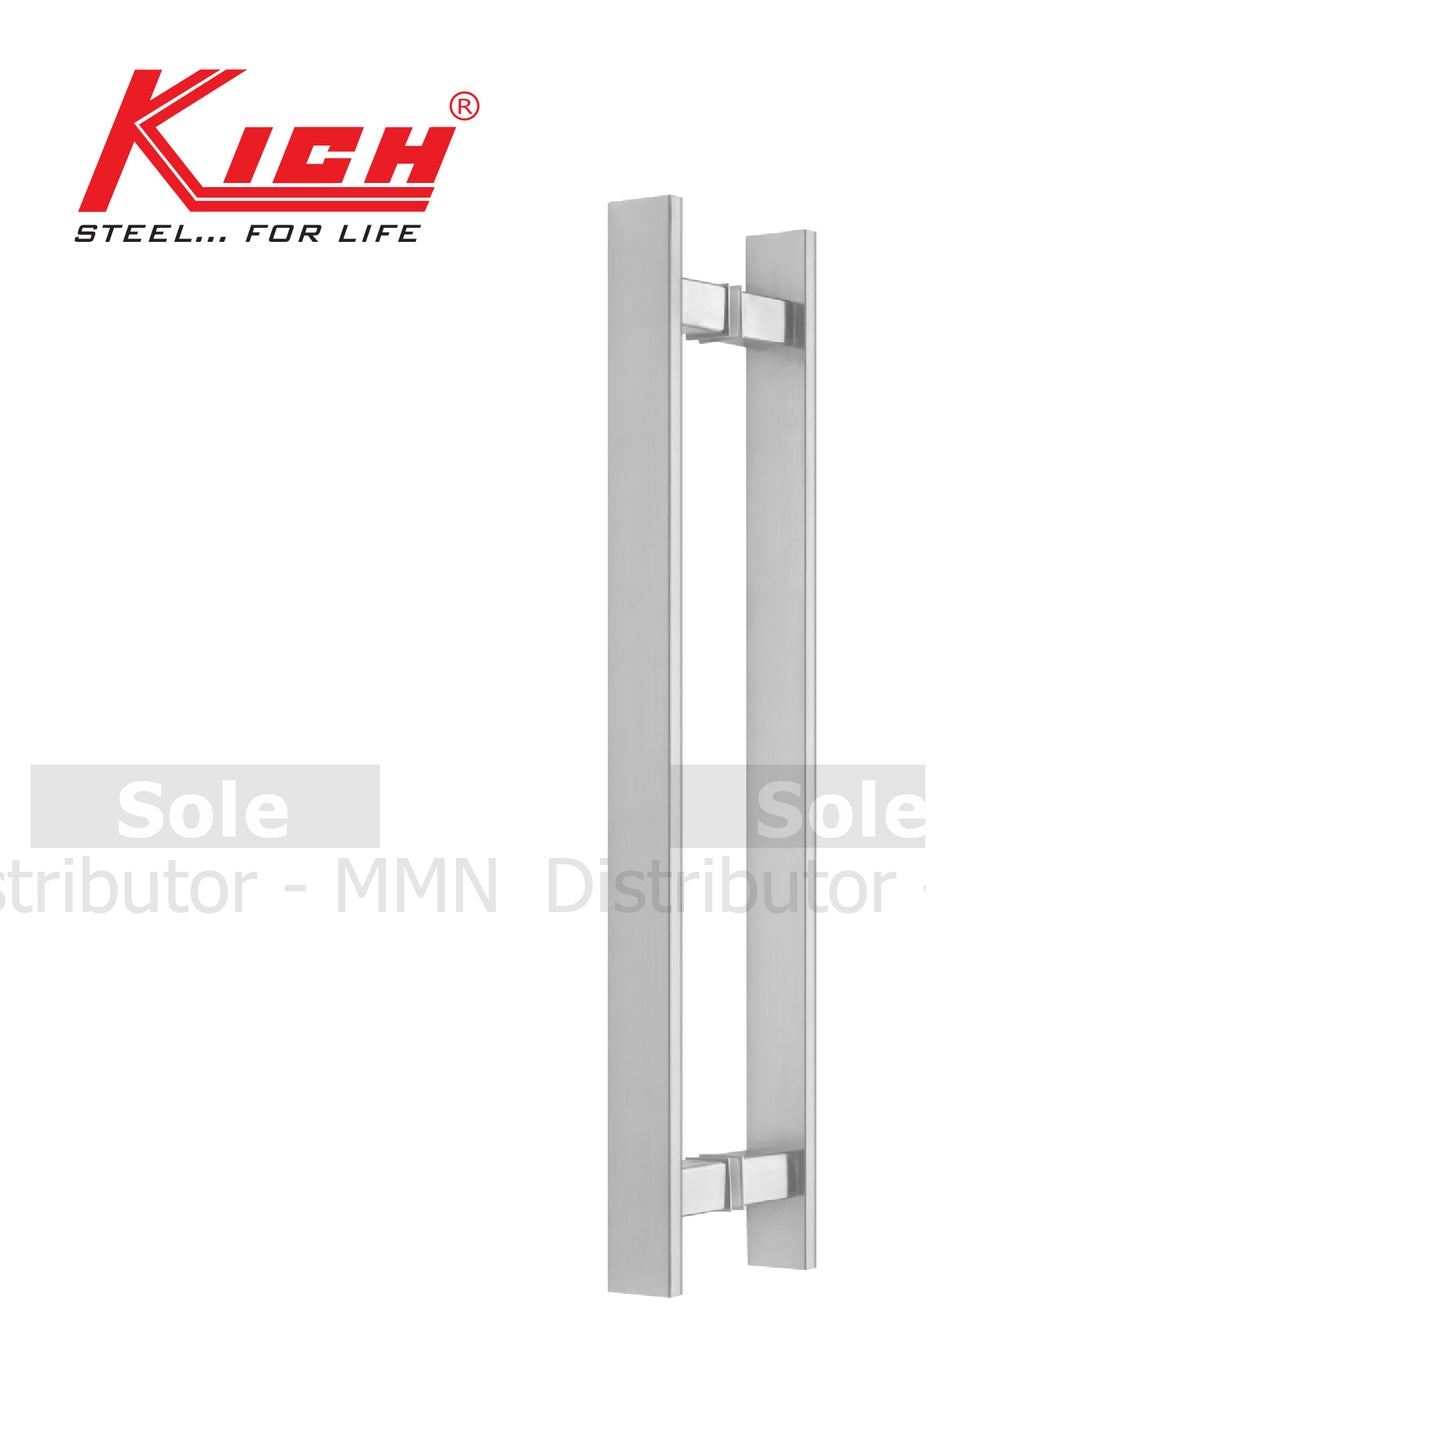 Kich Square Flat Pull Handle , Size 450mm,600mm & 900mm , 316 Stainless Steel Finish (Pair) - KPHH8540